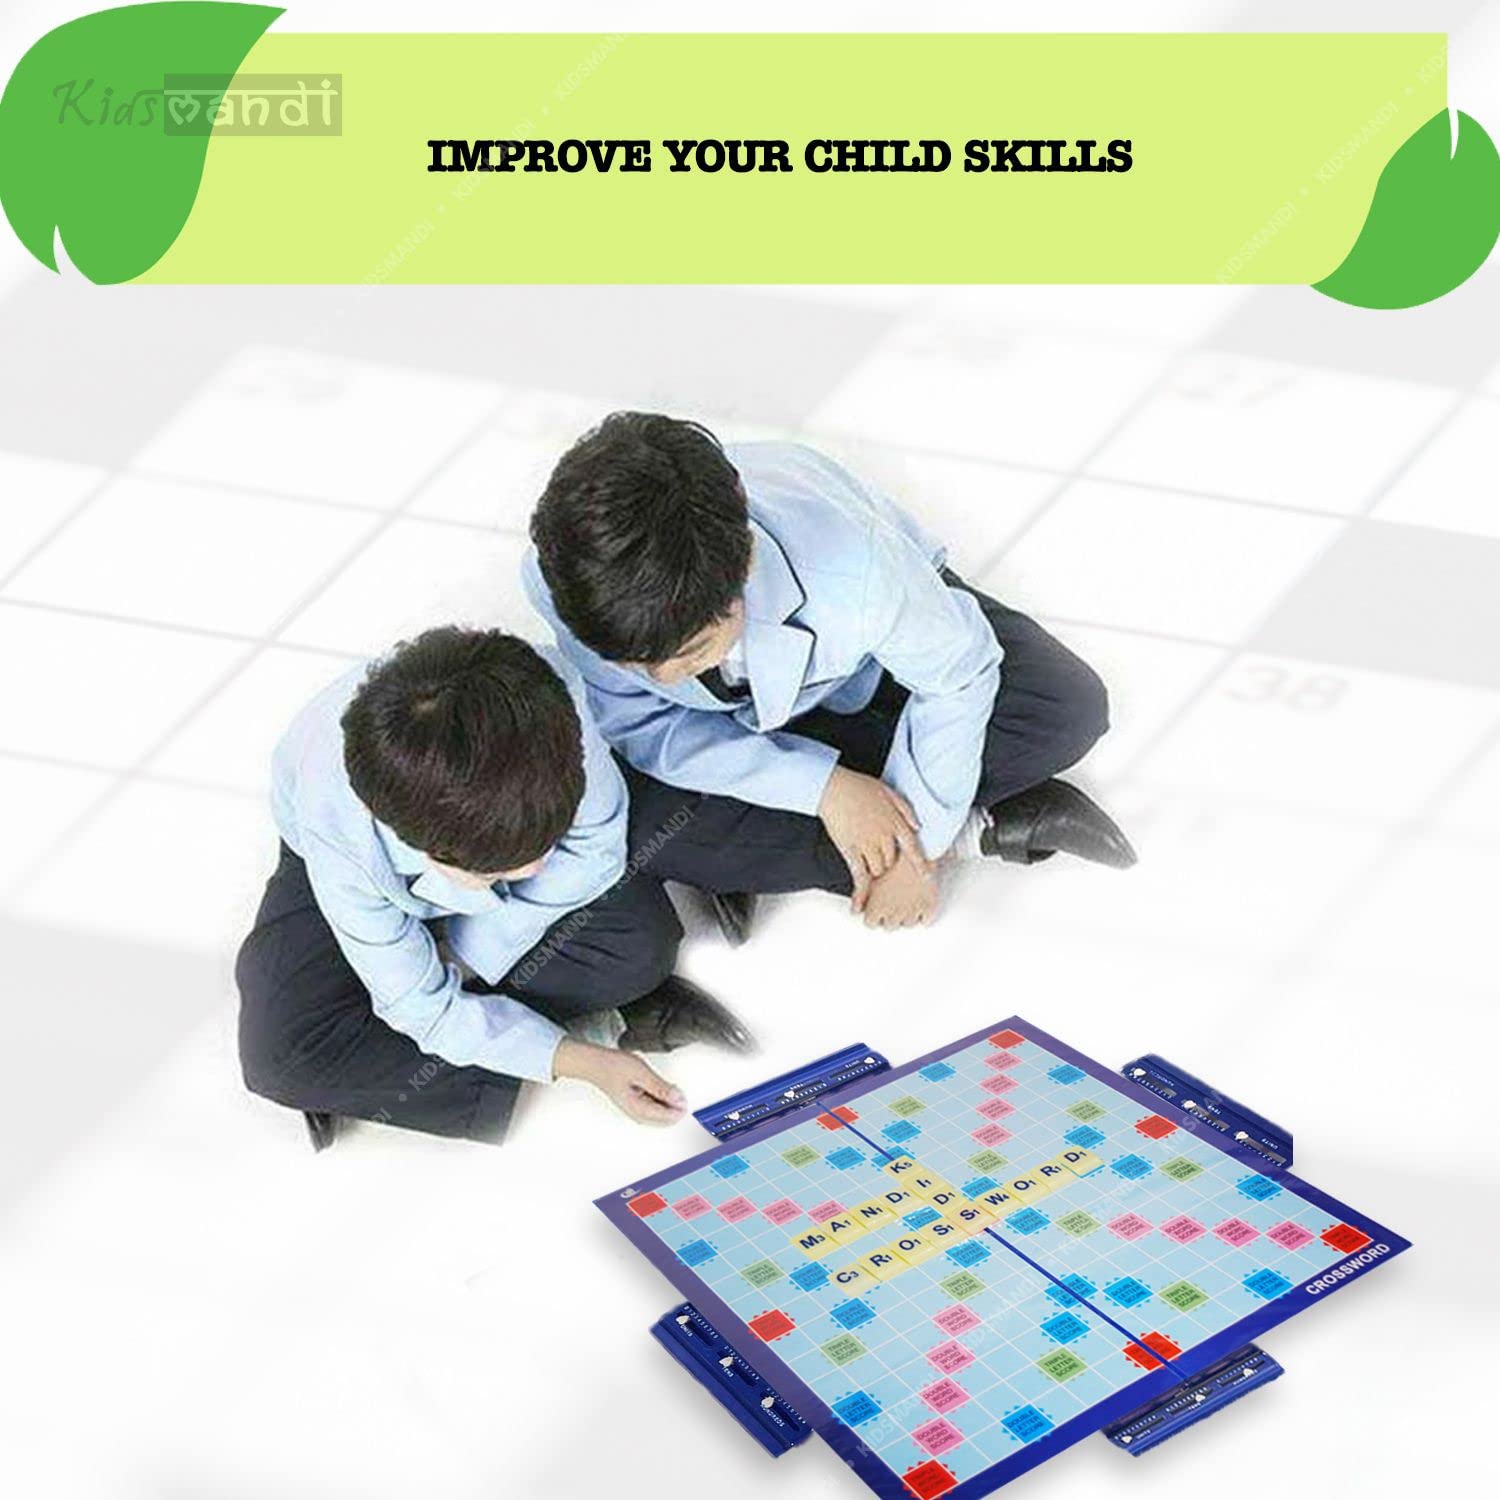 Kids Mandi Crossword Board Game for fun learning and entertainment.